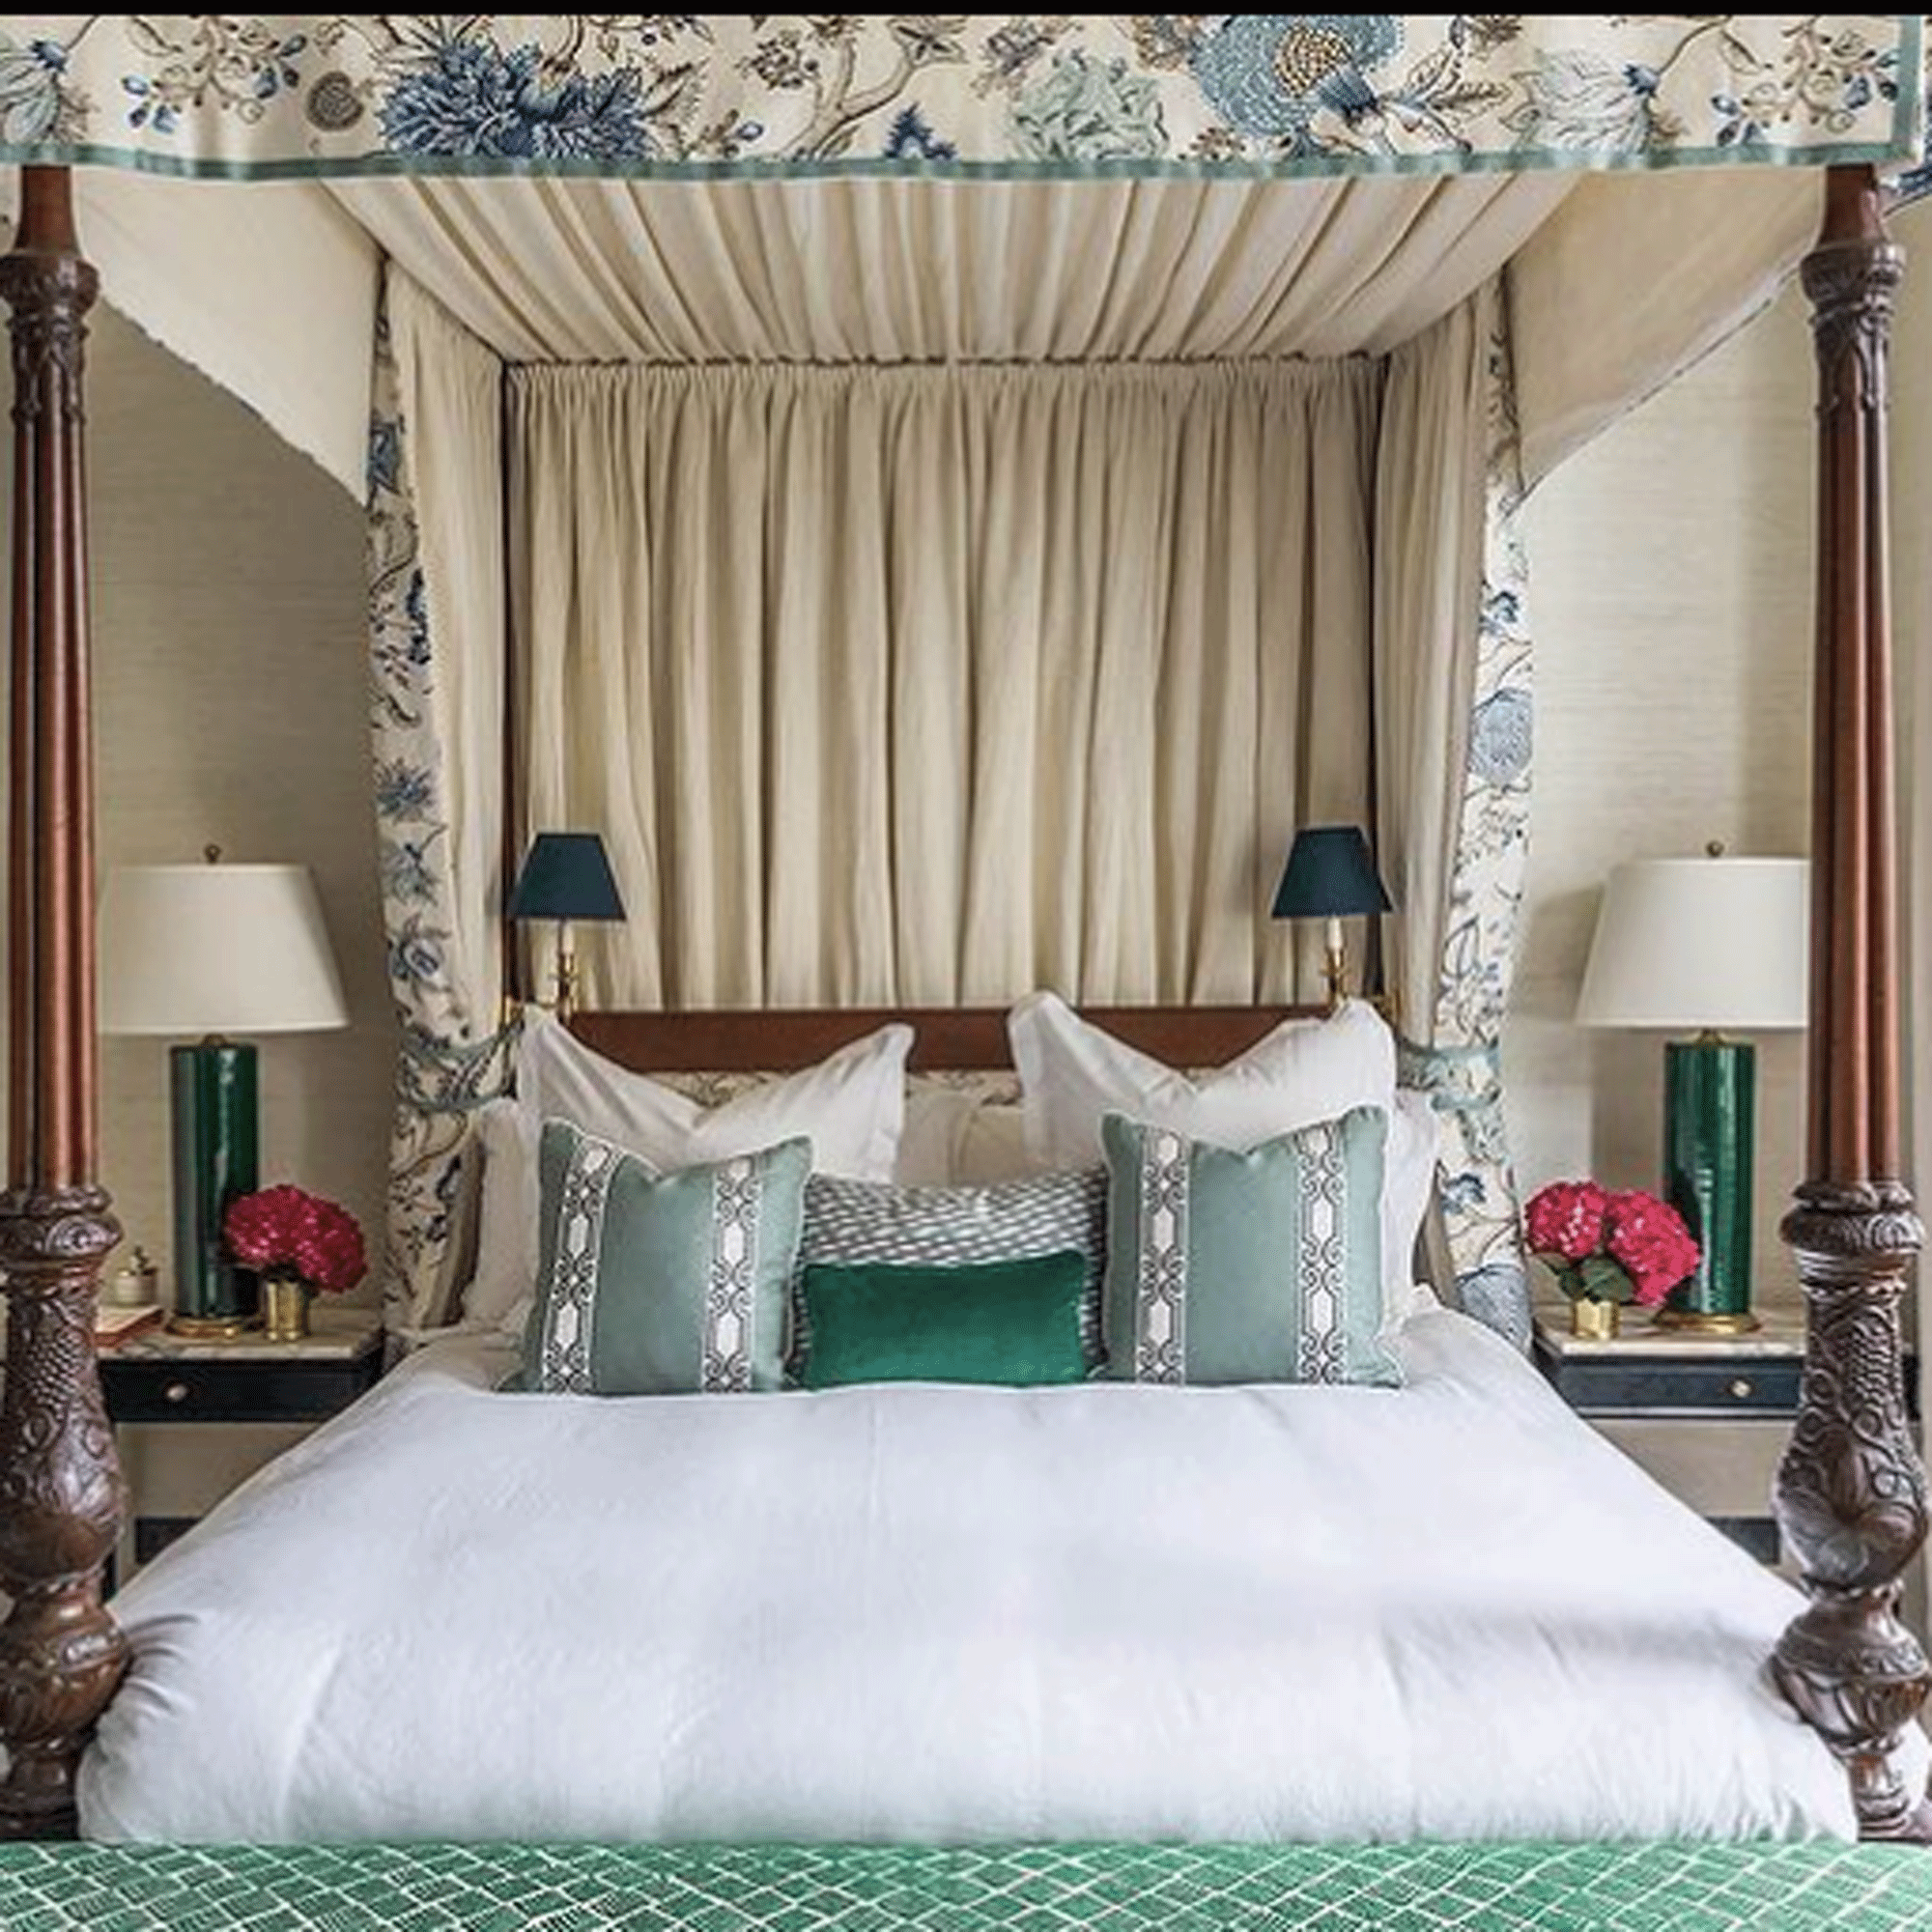 Four poster bed with teal accessories